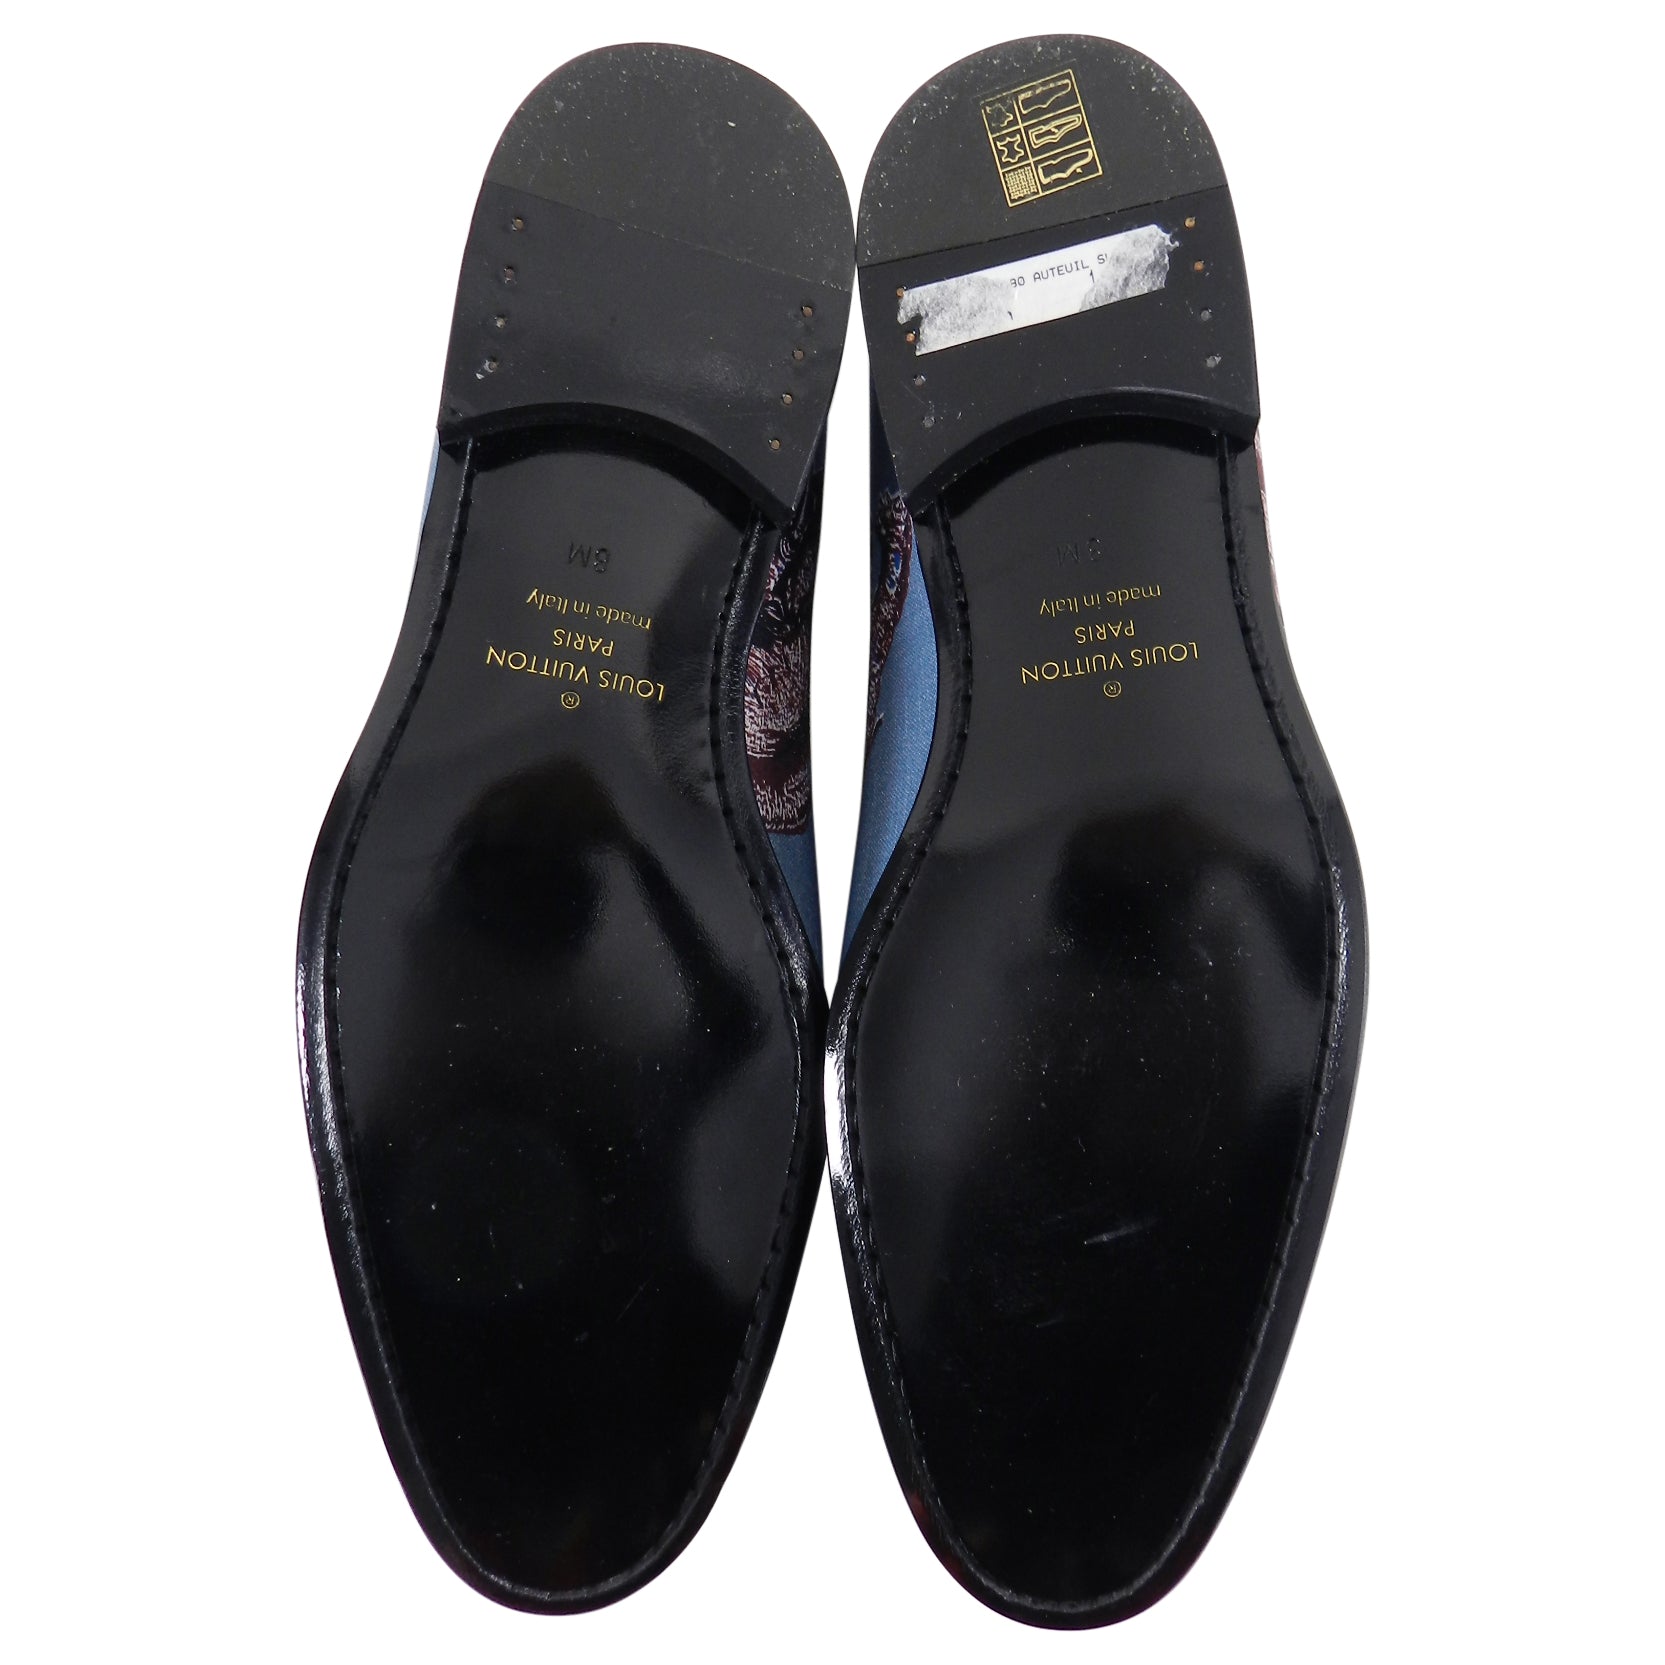 Louis Vuitton Slippers in Surulere - Shoes, Brothersman Luxury